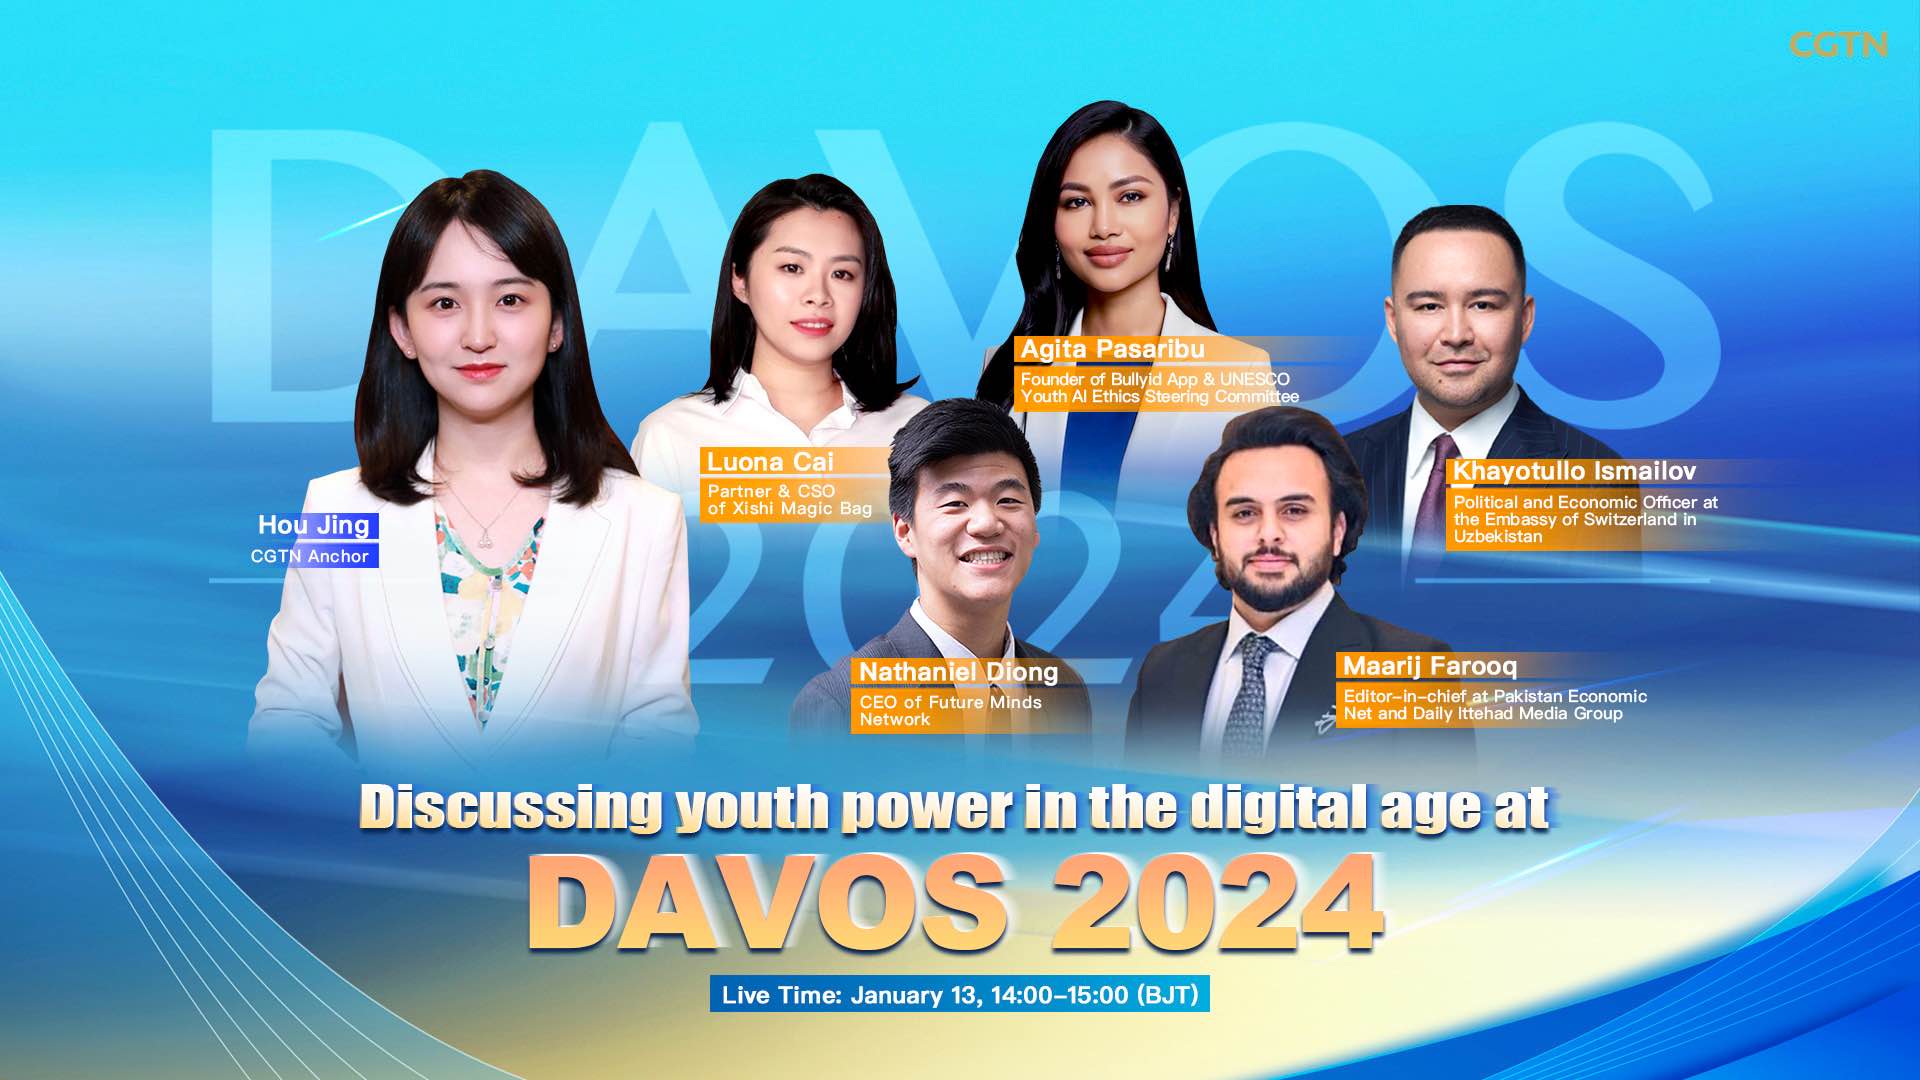 Live: Discussing youth power at Davos 2024